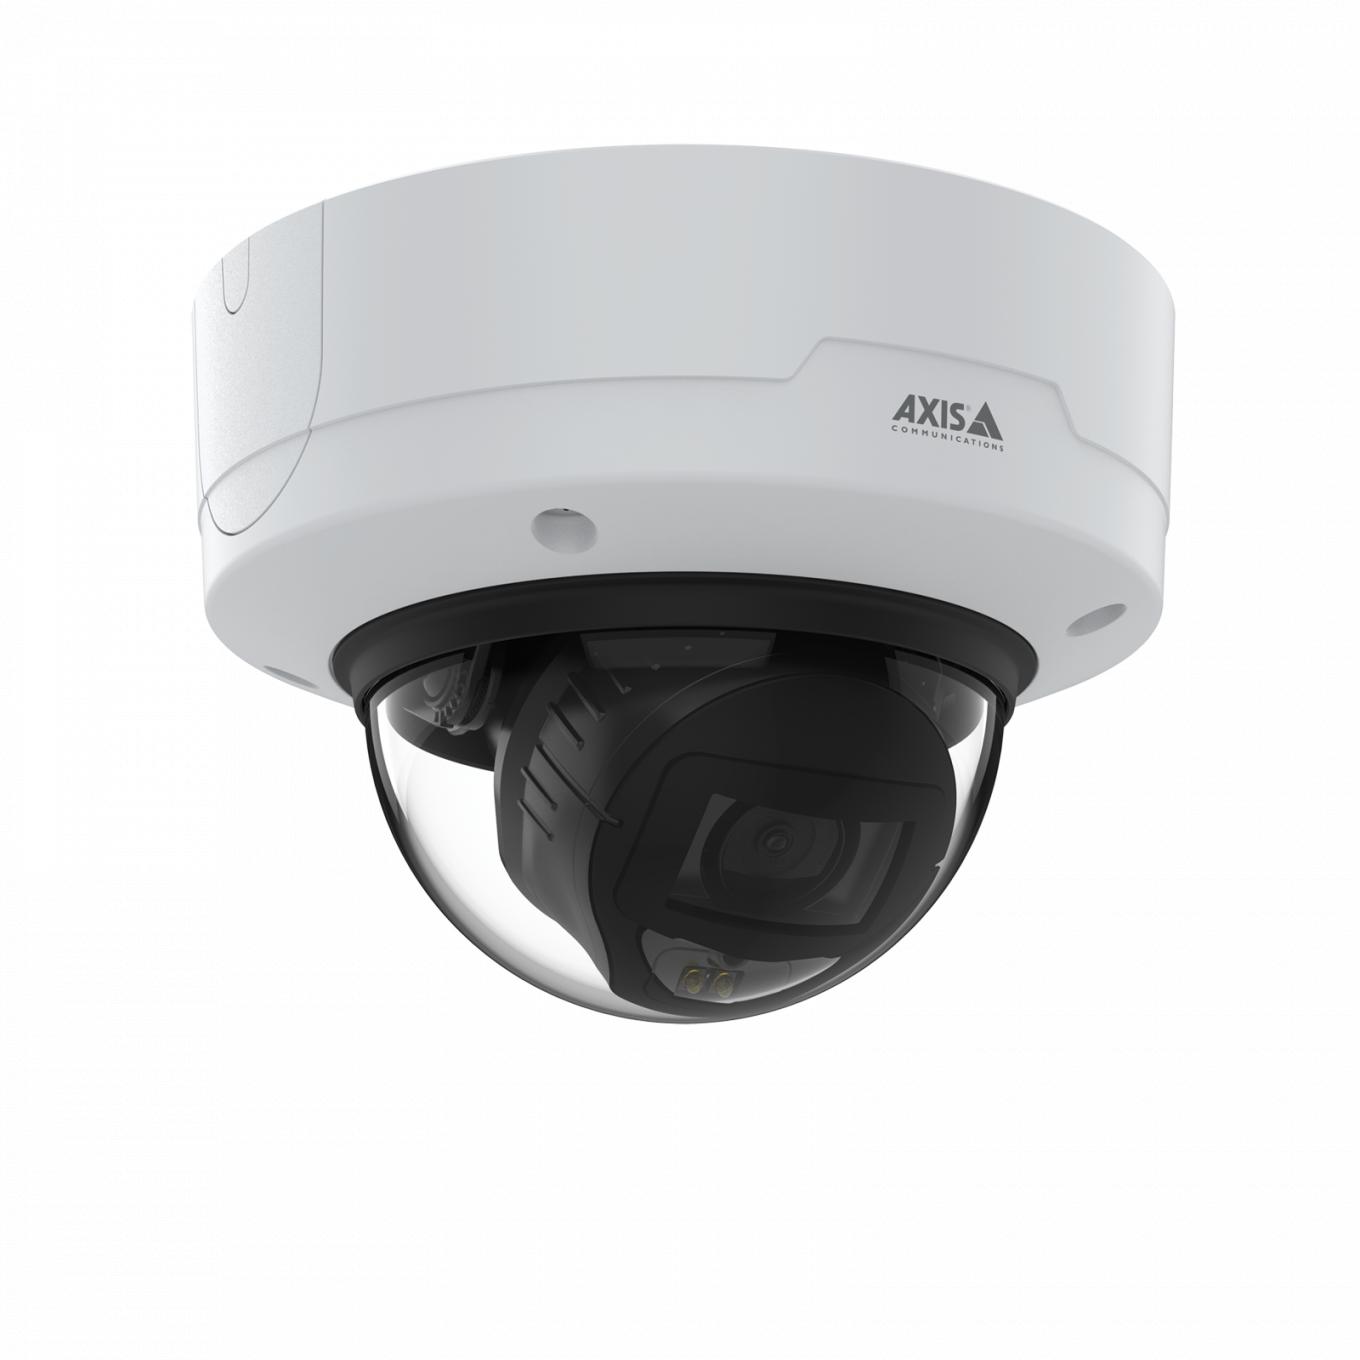 AXIS P3268-LV Dome Camera | Axis Communications